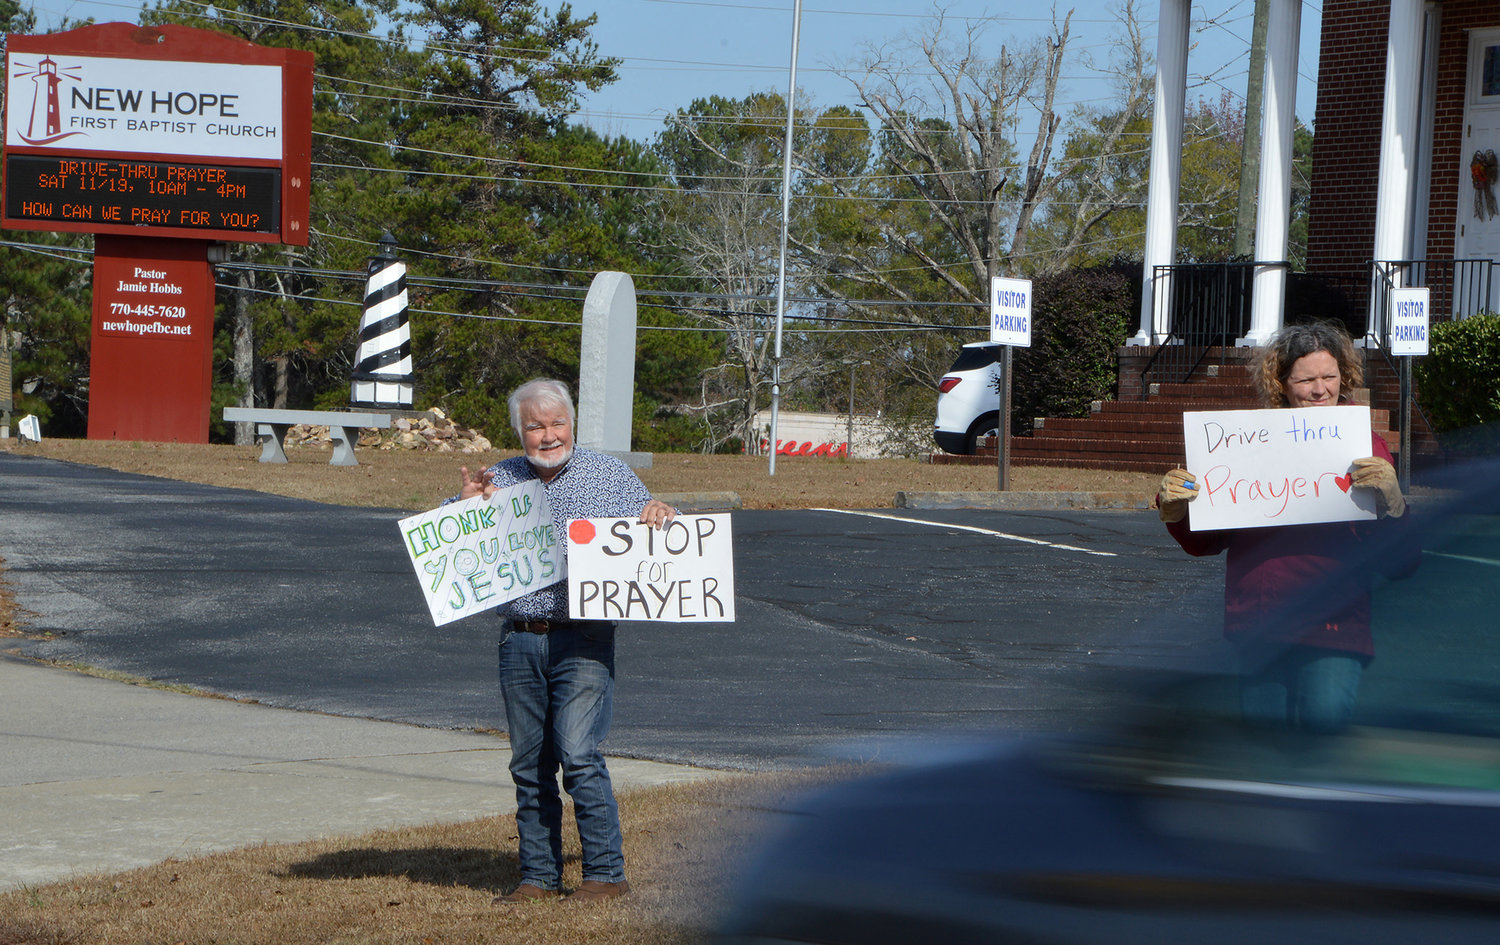 Bill Lloyd waves to a honking motorist while holding signs encouraging people to pull into New Hope First Baptist Church for drive-thru prayer on Saturday, Nov. 19, 2022, in Dallas, Ga. Lloyd's wife Debbie is at right. (Index/Henry Durand)